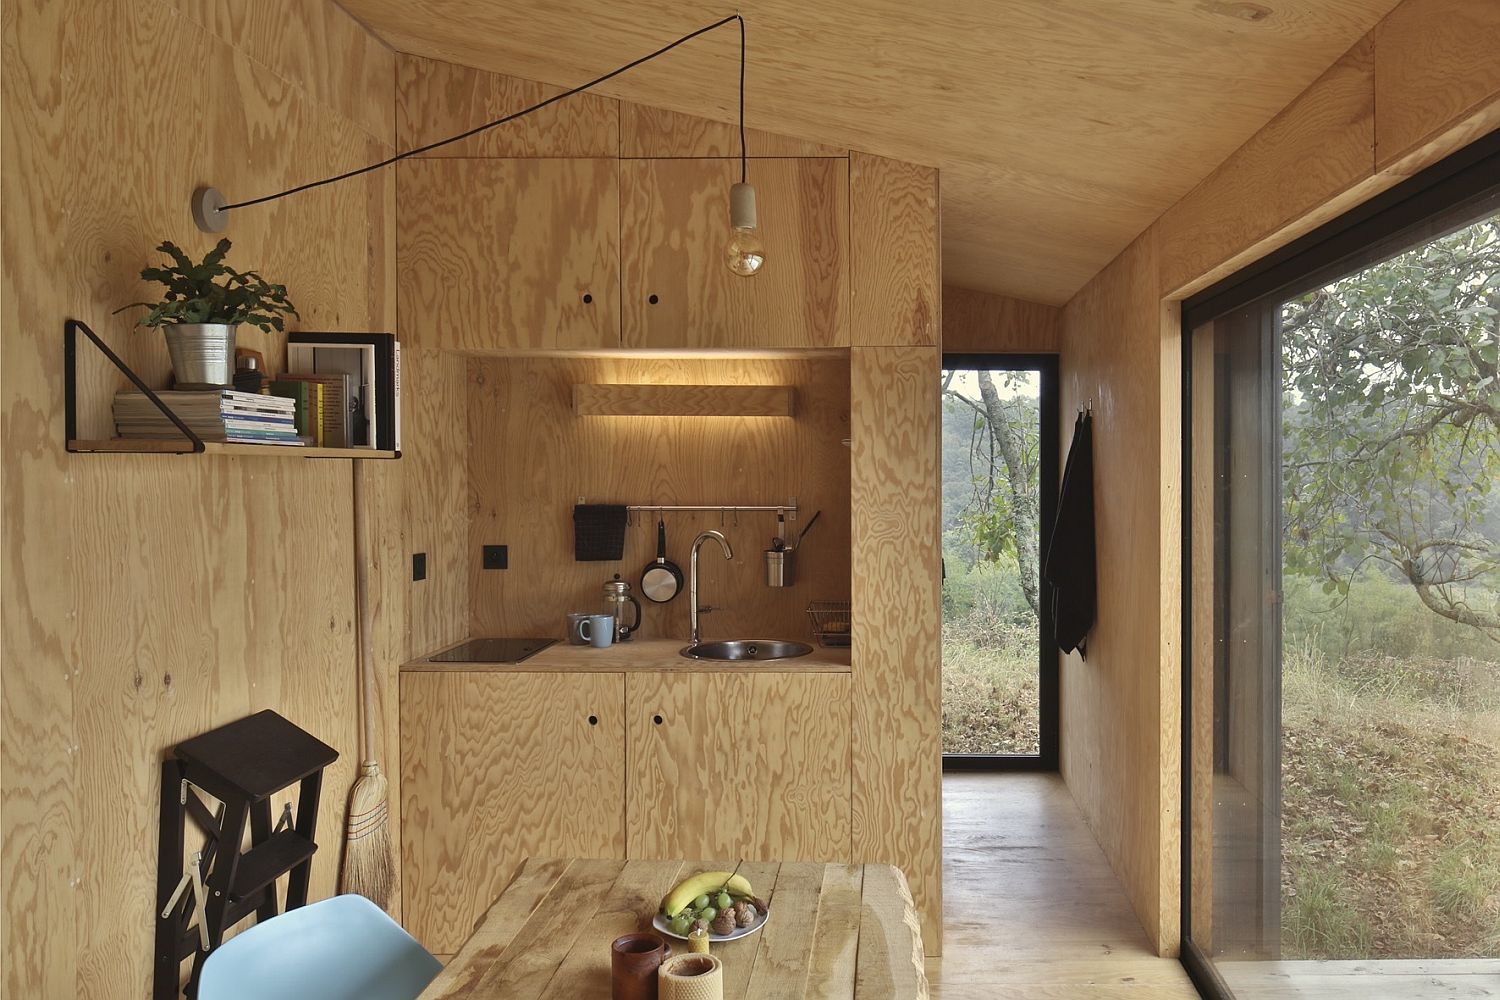 Lighter-tones-of-wood-shape-the-interior-of-the-cabin